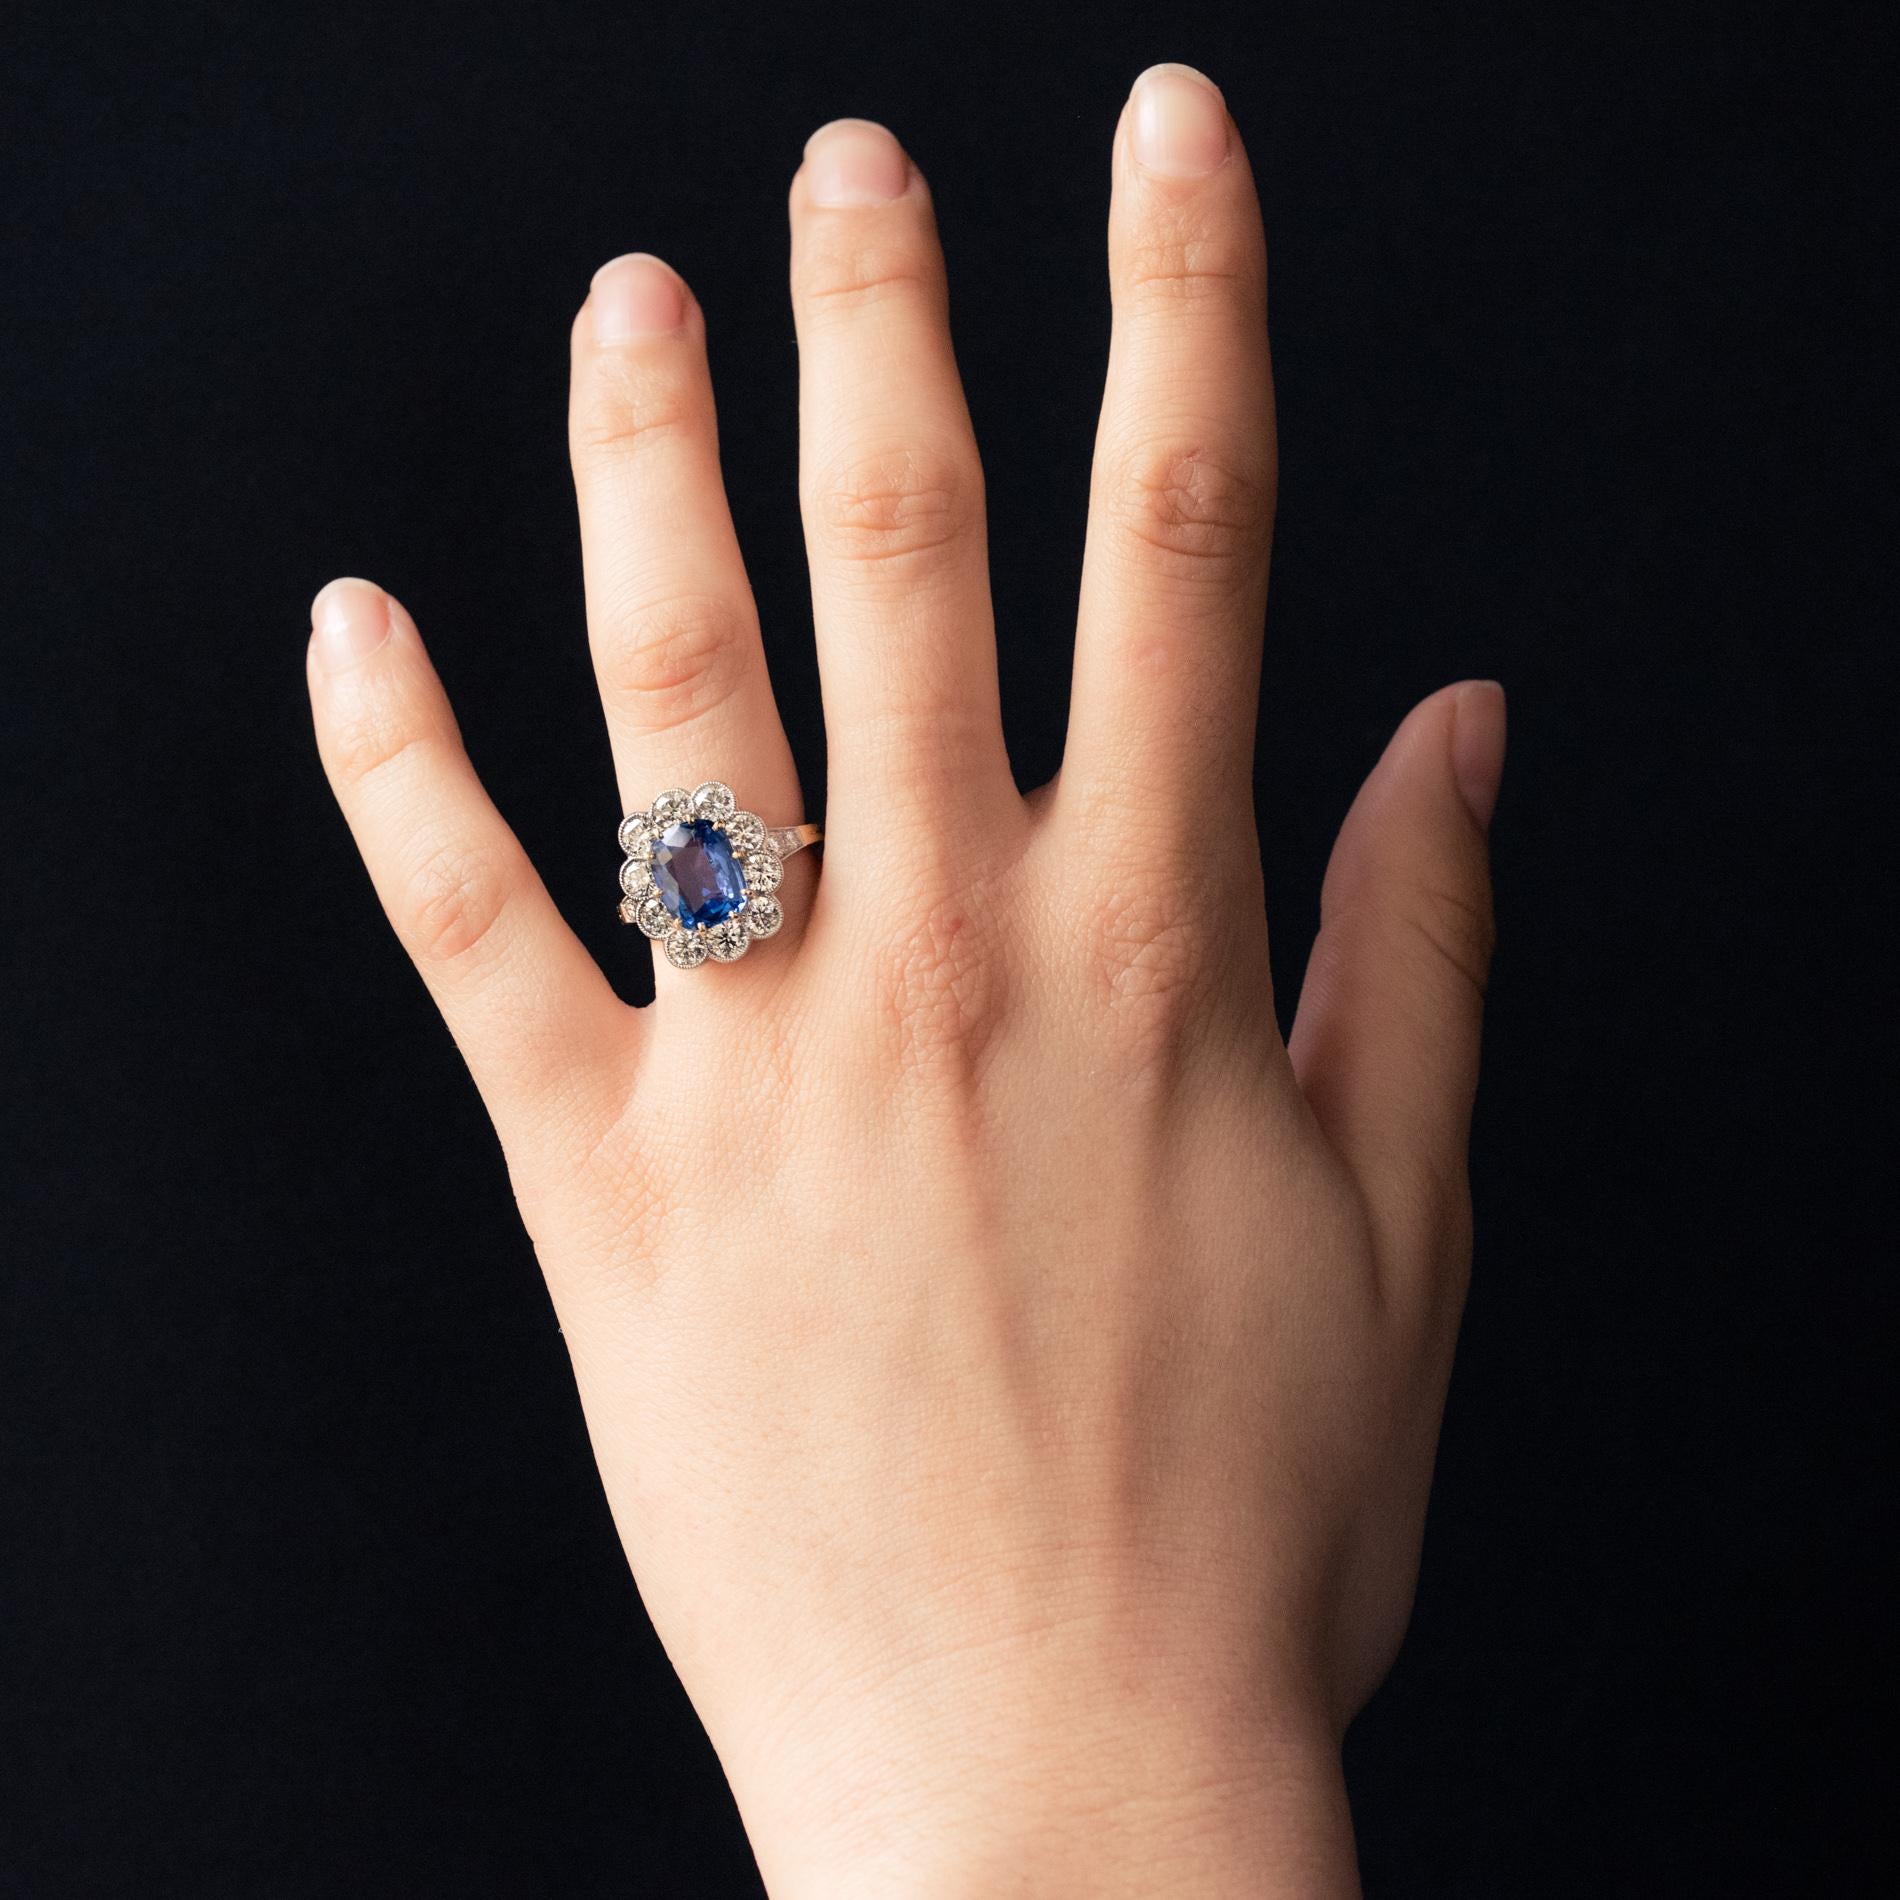 Ring in 18 karat yellow gold, eagle's head hallmark and platinum, dog's head hallmark.
Sublime daisy ring, its setting is adorned with a rectangular cushion- cut blue sapphire set with claws,  surrounded by 10 modern brilliant-cut diamonds. On both